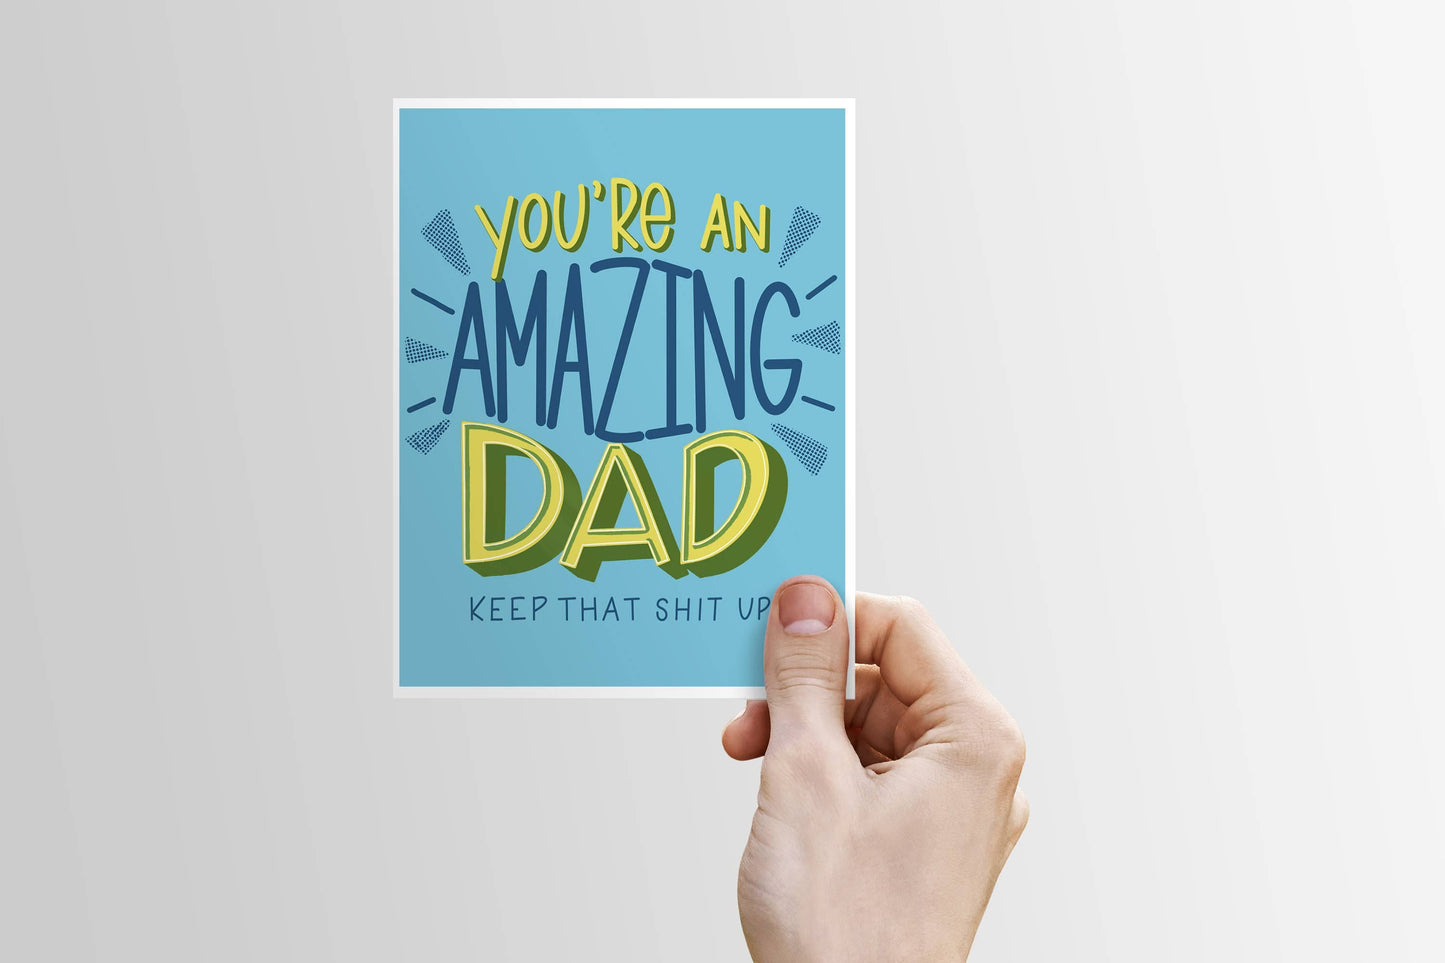 You're an Amazing Dad (Keep that Shit Up!) - Swear Card